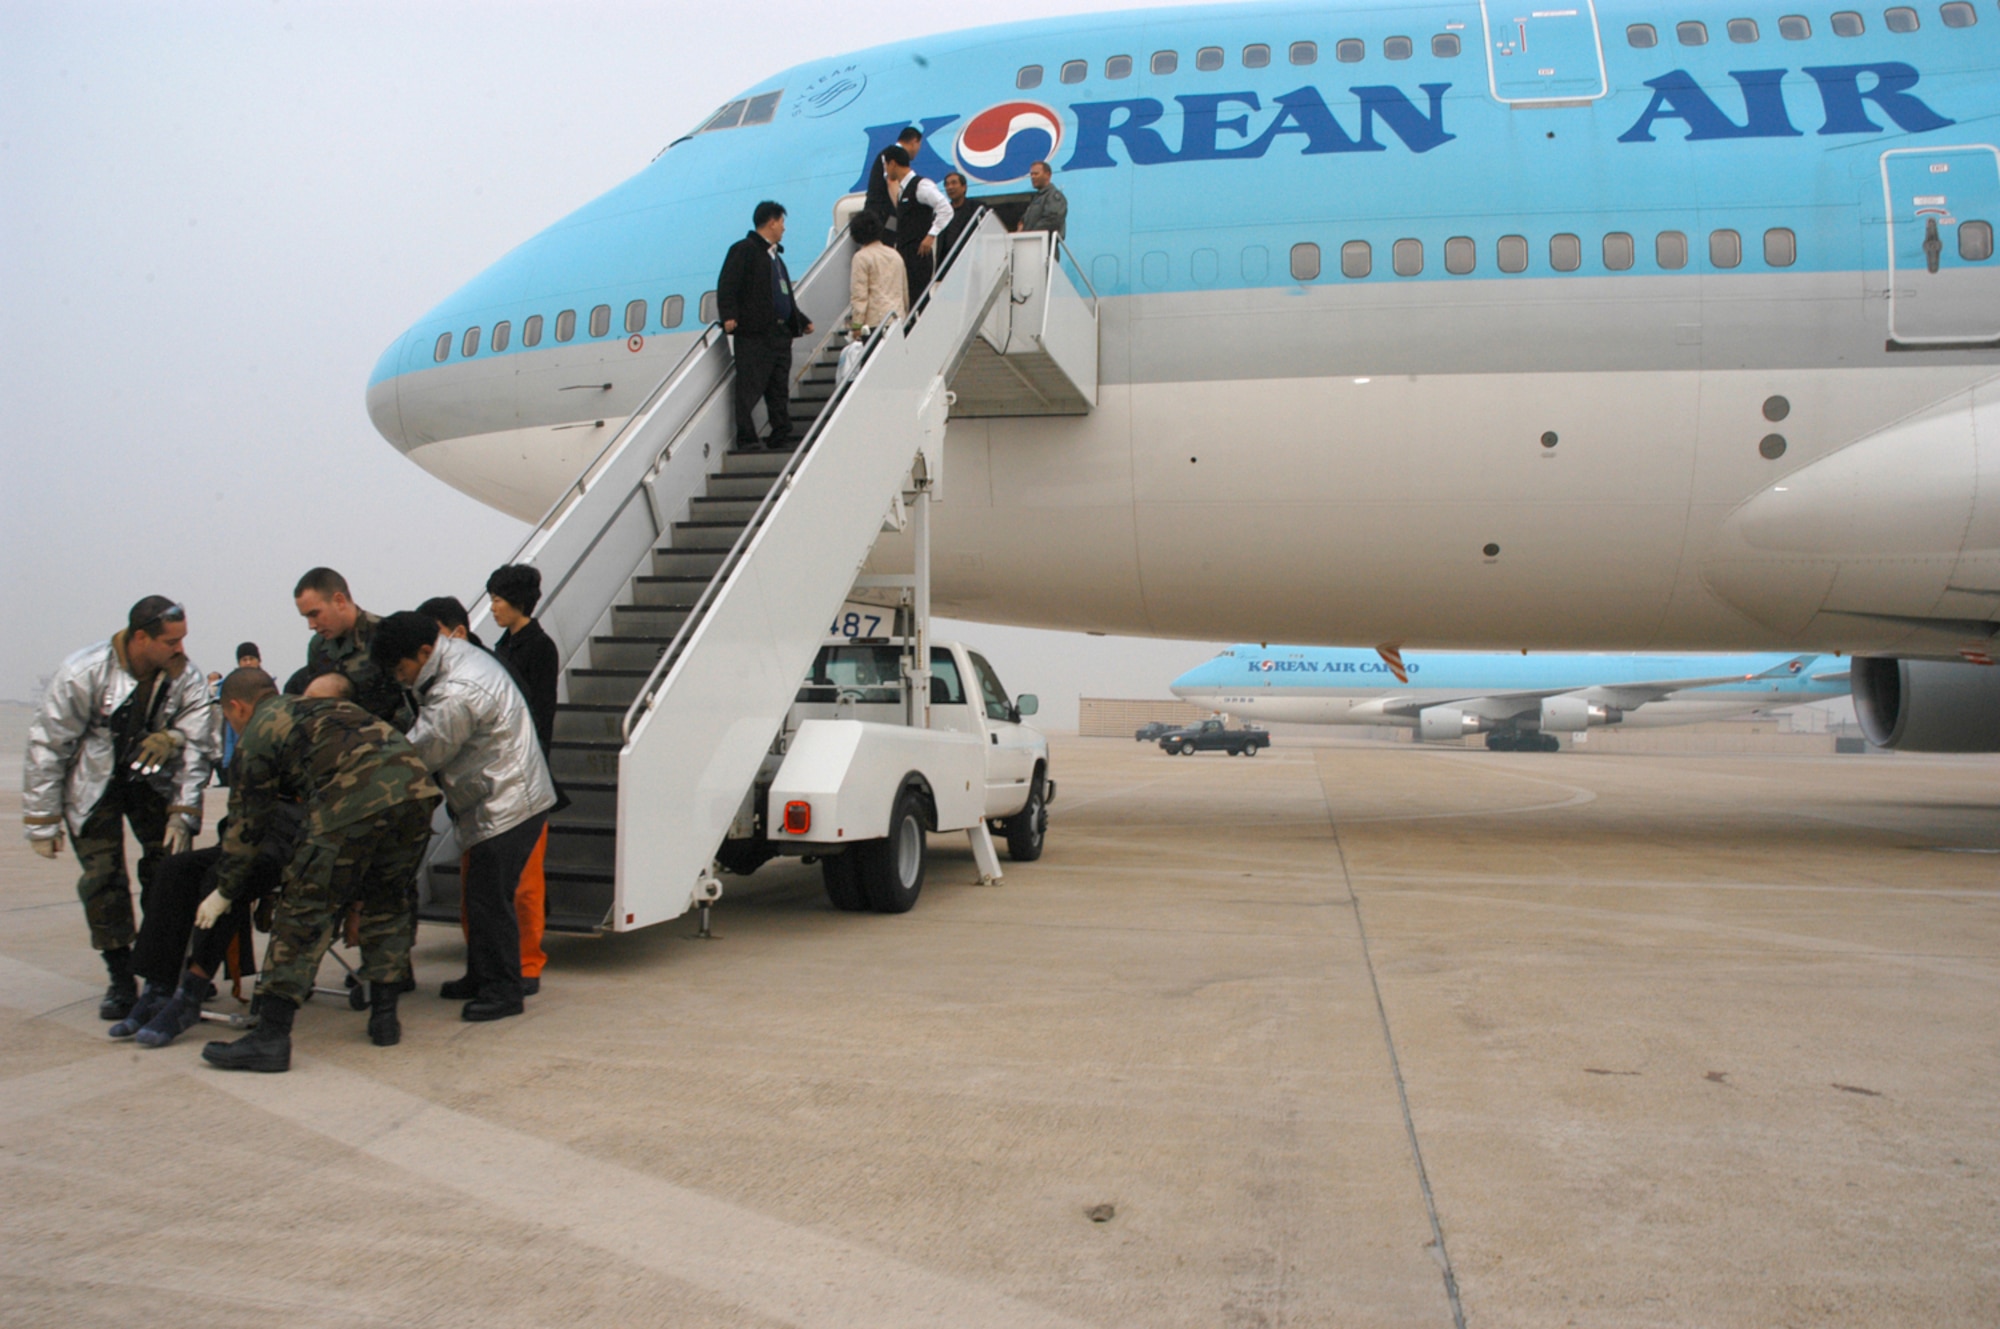 Medical and security personnel rush a 65-year old Korean man needing medical attention to an ambulance after his Korean Airline flight was diverted to Kunsan from Incheon International Airport. The passenger airliner, with 274 people on board, diverted to Kunsan because of poor weather conditions at Incheon. The Korean man was transported to Kunsan Medical Center in downtown Kunsan City. The passengers were offered bottled water as they waited to take off, and the aircraft was refueled by Air Force personnel. (U.S. Air Force photo/Staff Sgt. Nathan Gallahan) 